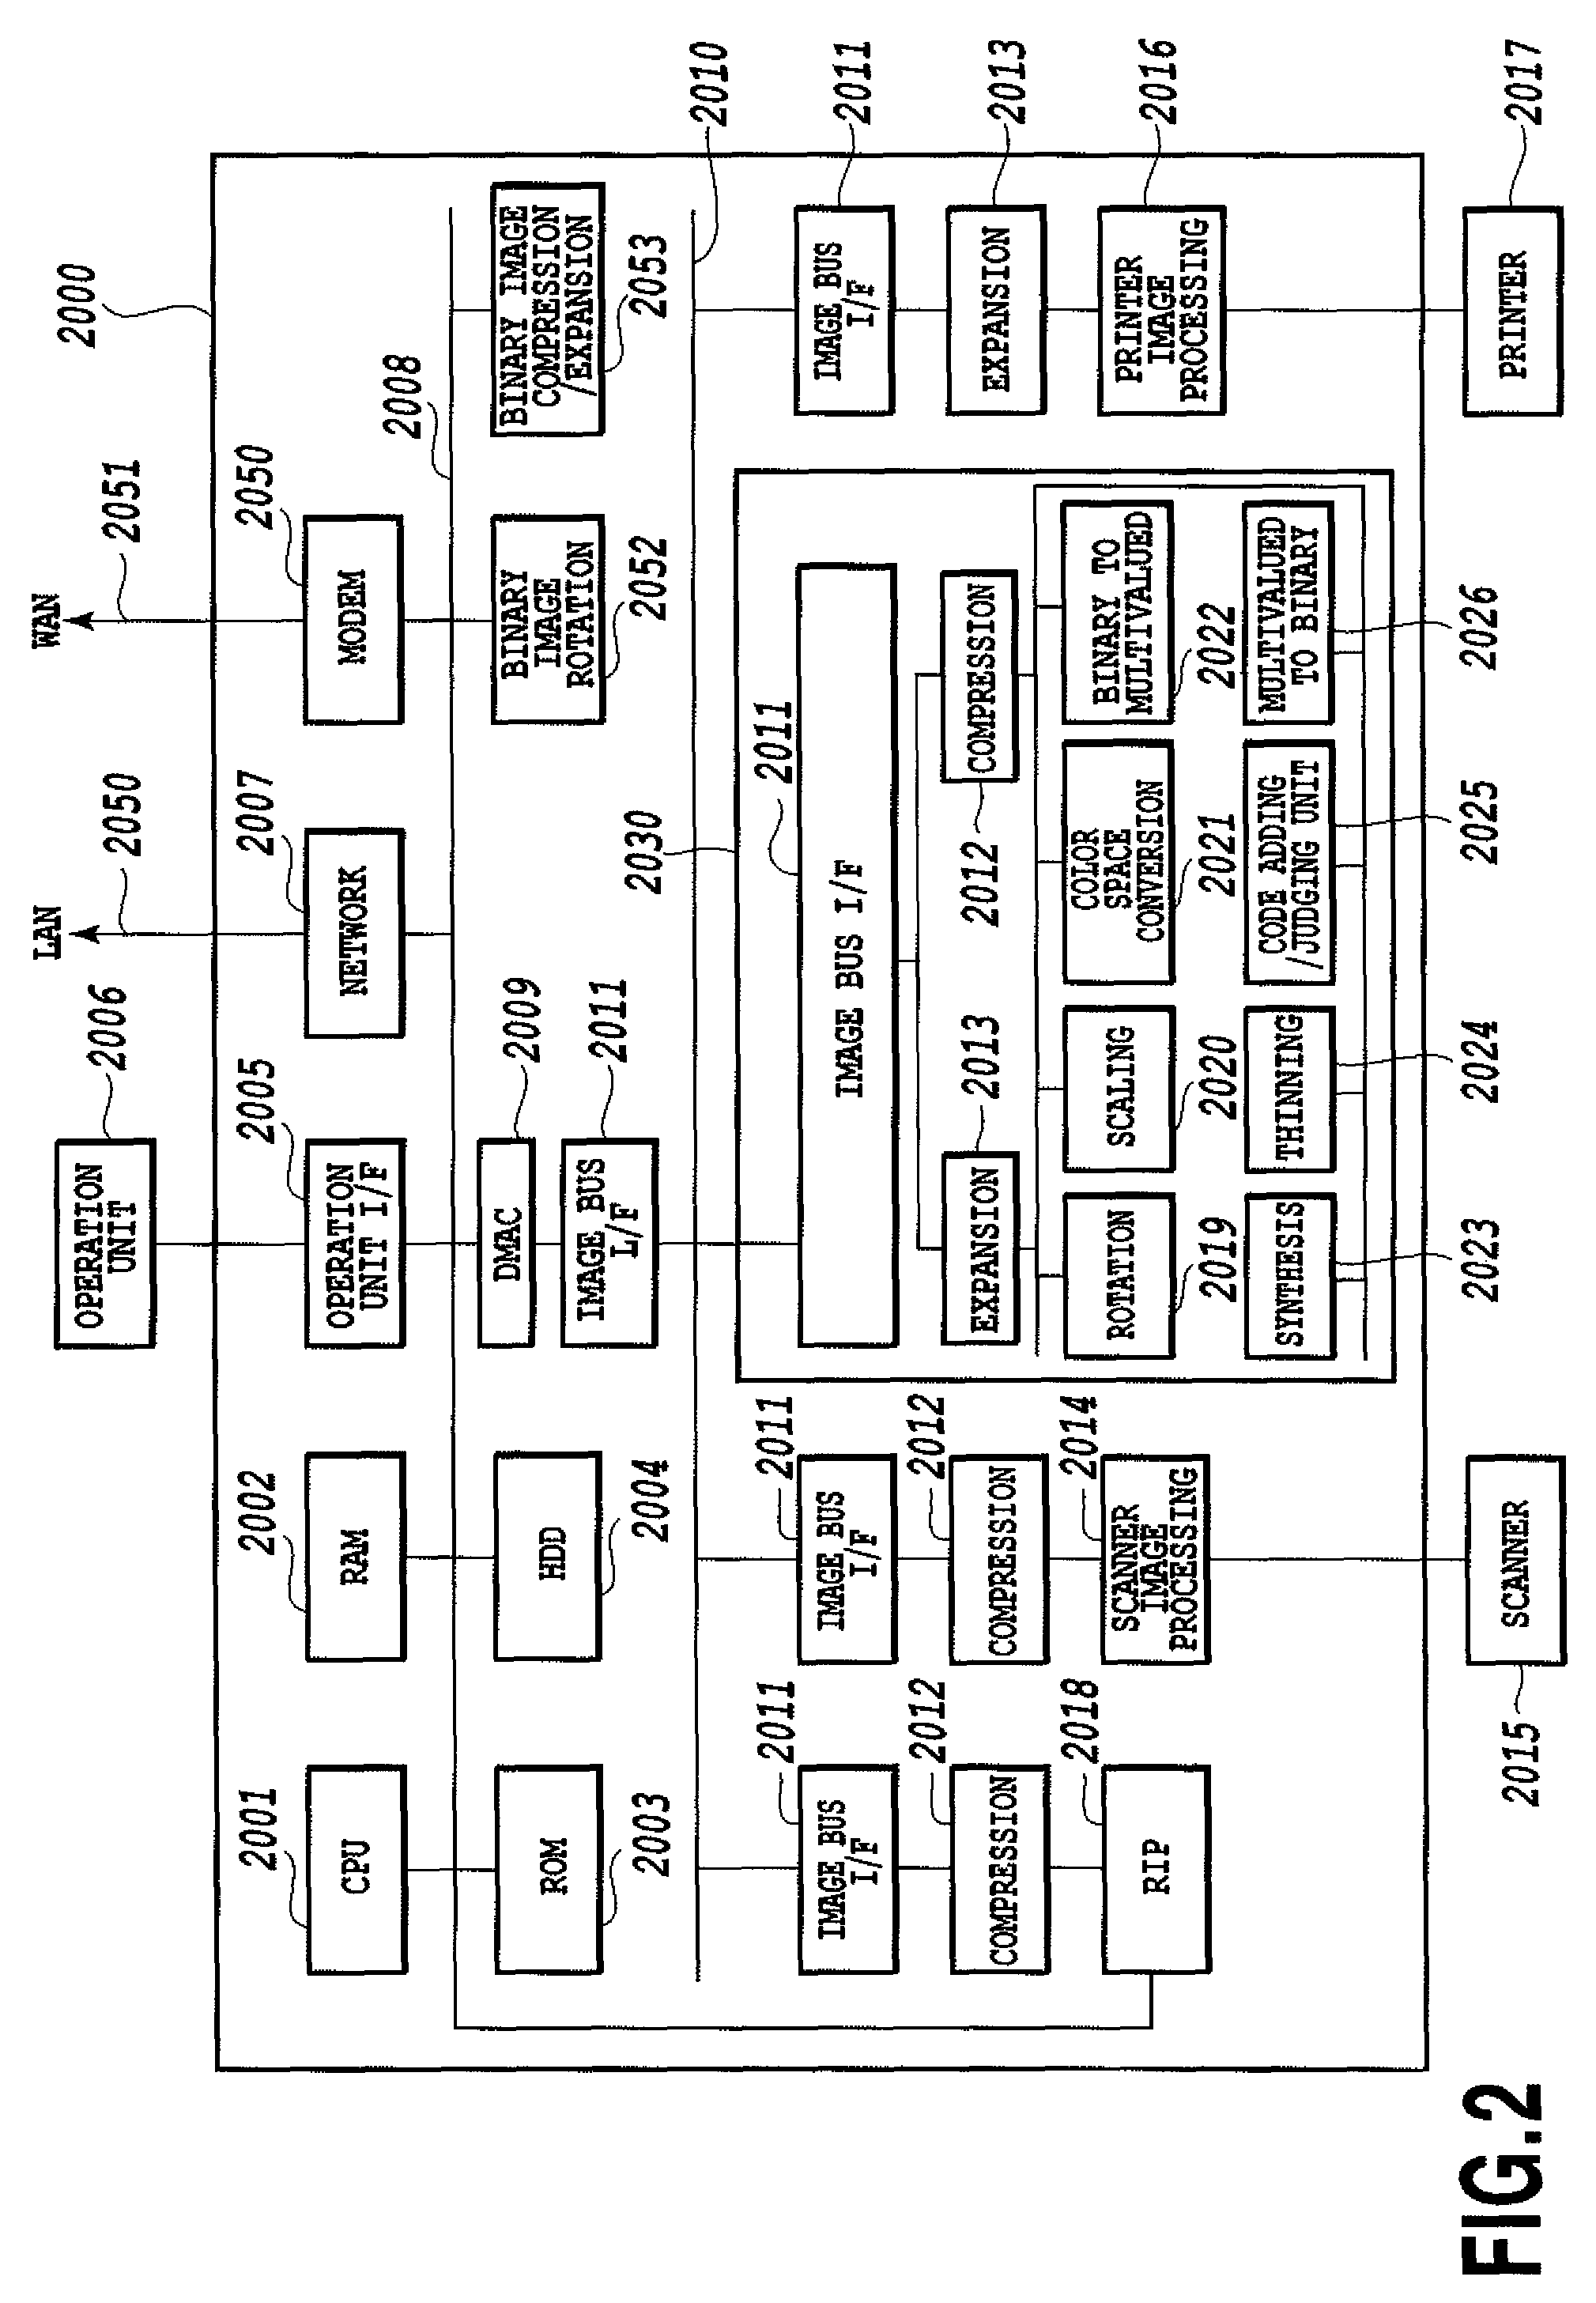 Image forming system, image processing apparatus, determination device, and image processing method